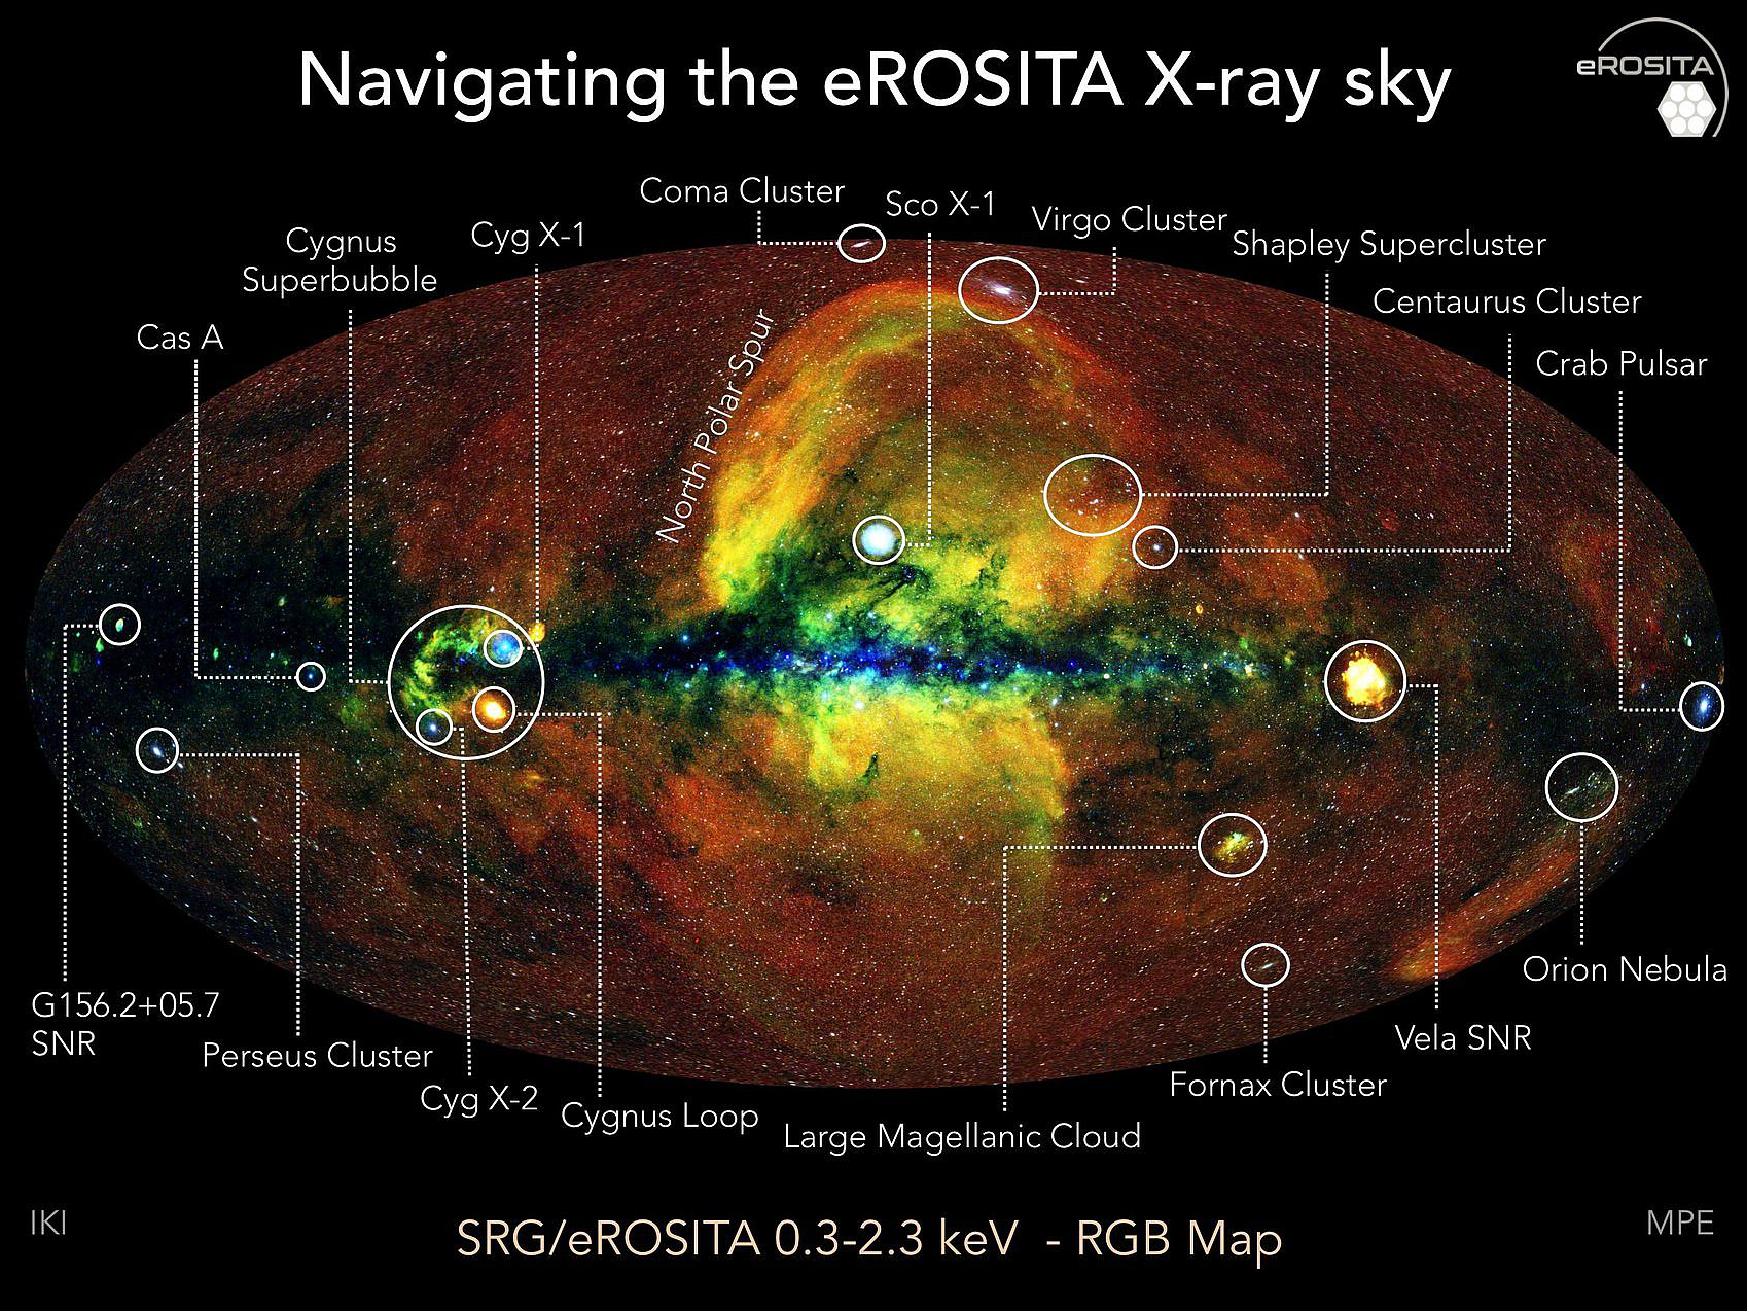 Figure 22: Annotated version of the eROSITA First All-Sky image. Several prominent X-ray features are marked, ranging from distant galaxy clusters (Coma, Virgo, Fornax, Perseus) to extended sources such as Supernova Remnants (SNRs) and Nebulae to bright point sources, e.g. Sco X-1, the first extrasolar X-ray source to be detected. The Vela SNR is to the right of this image, the Large Magellanic Cloud in the bottom right quadrant, the Shapley supercluster in the upper right (though not easily visible in this projection), image credit: Jeremy Sanders, Hermann Brunner, Andrea Merloni and the eSASS team (MPE); Eugene Churazov, Marat Gilfanov (on behalf of IKI)